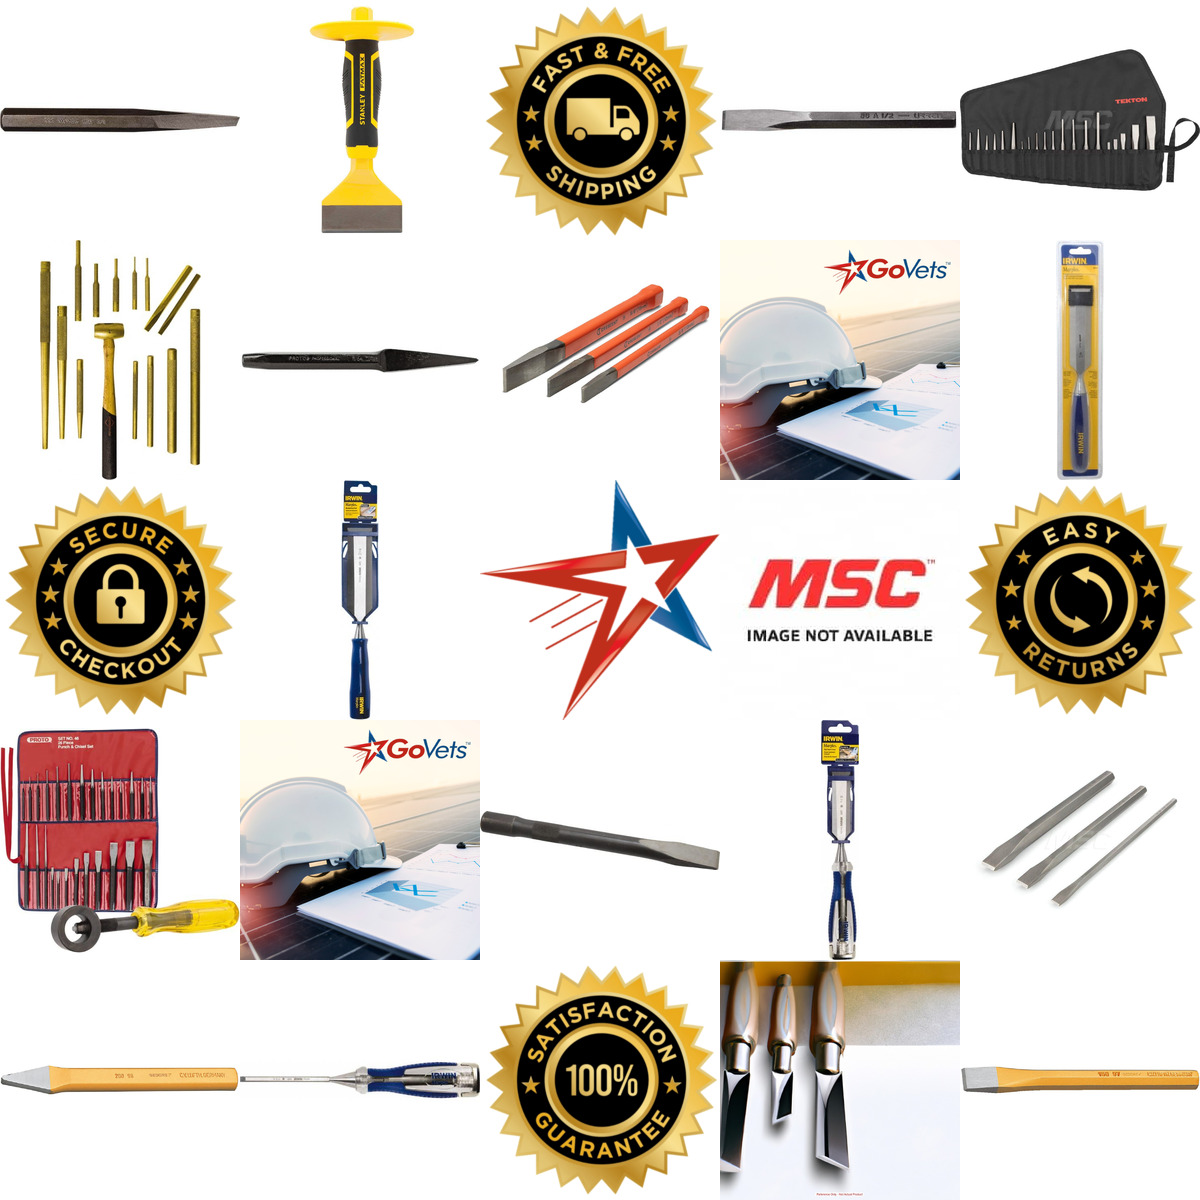 A selection of Chisels and Accessories products on GoVets